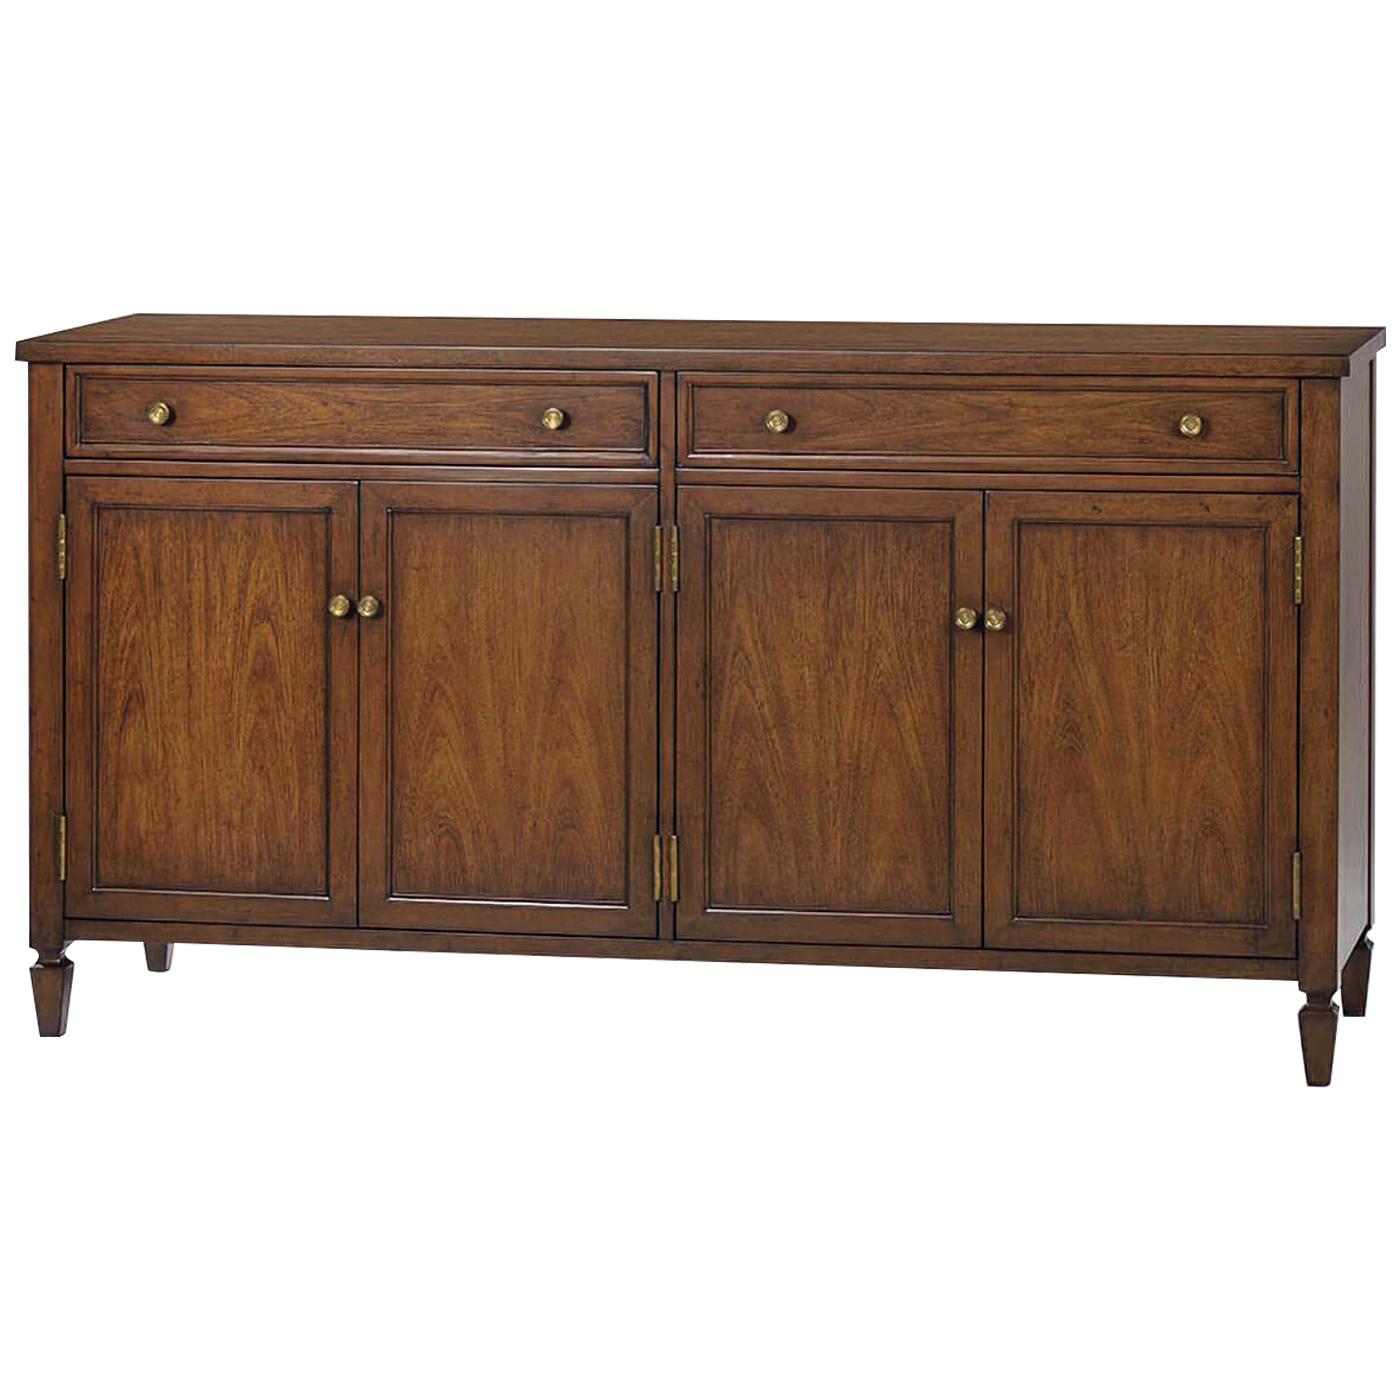 Classic European Sideboard For Sale